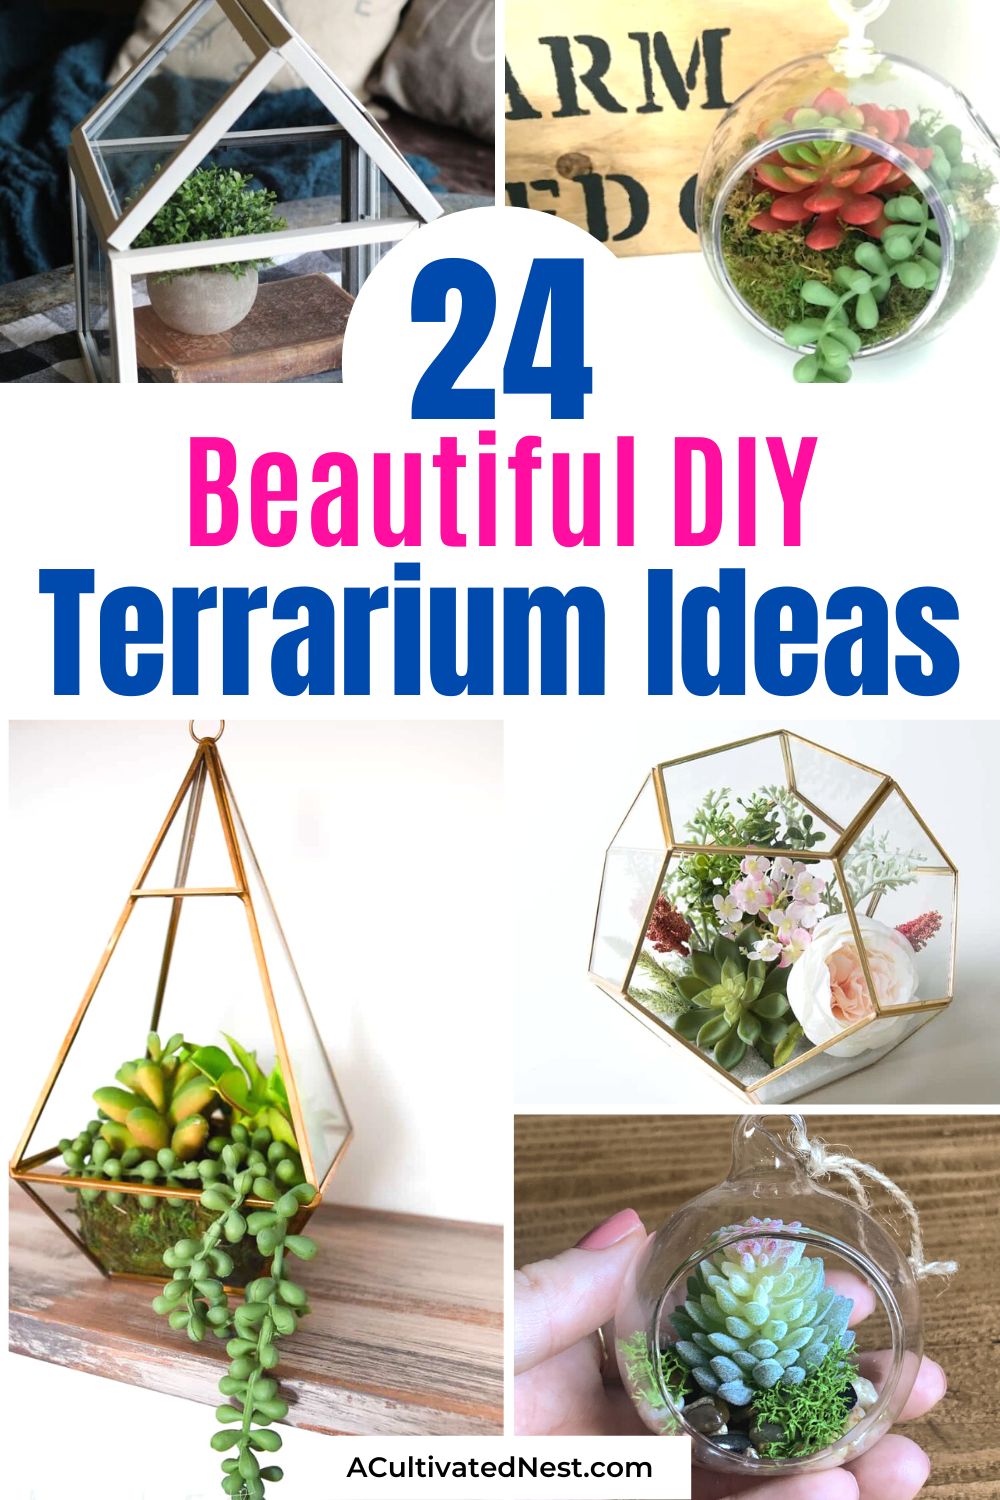 24 Pretty DIY Terrarium Ideas- If you want a fun, creative way to spruce up your living space, then you should consider crafting your own pretty DIY terrarium! | homemade succulent planter, succulent terrarium, #crafting #DIYTerrarium #diyProject #diyDecorIdeas #ACultivatedNest